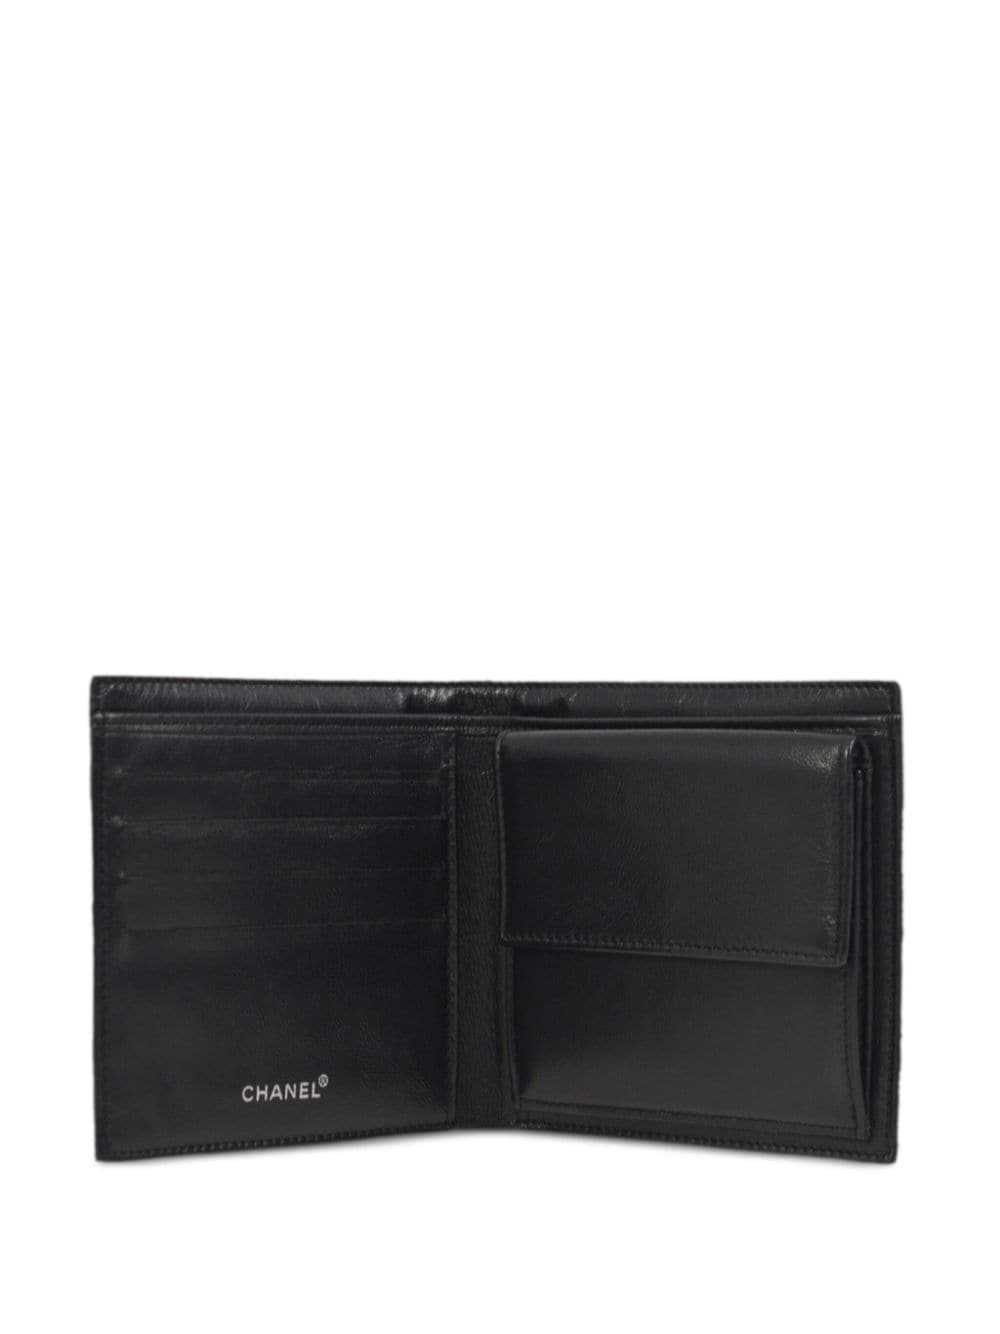 CHANEL Pre-Owned 2003 CC Travel Line wallet - Bla… - image 4